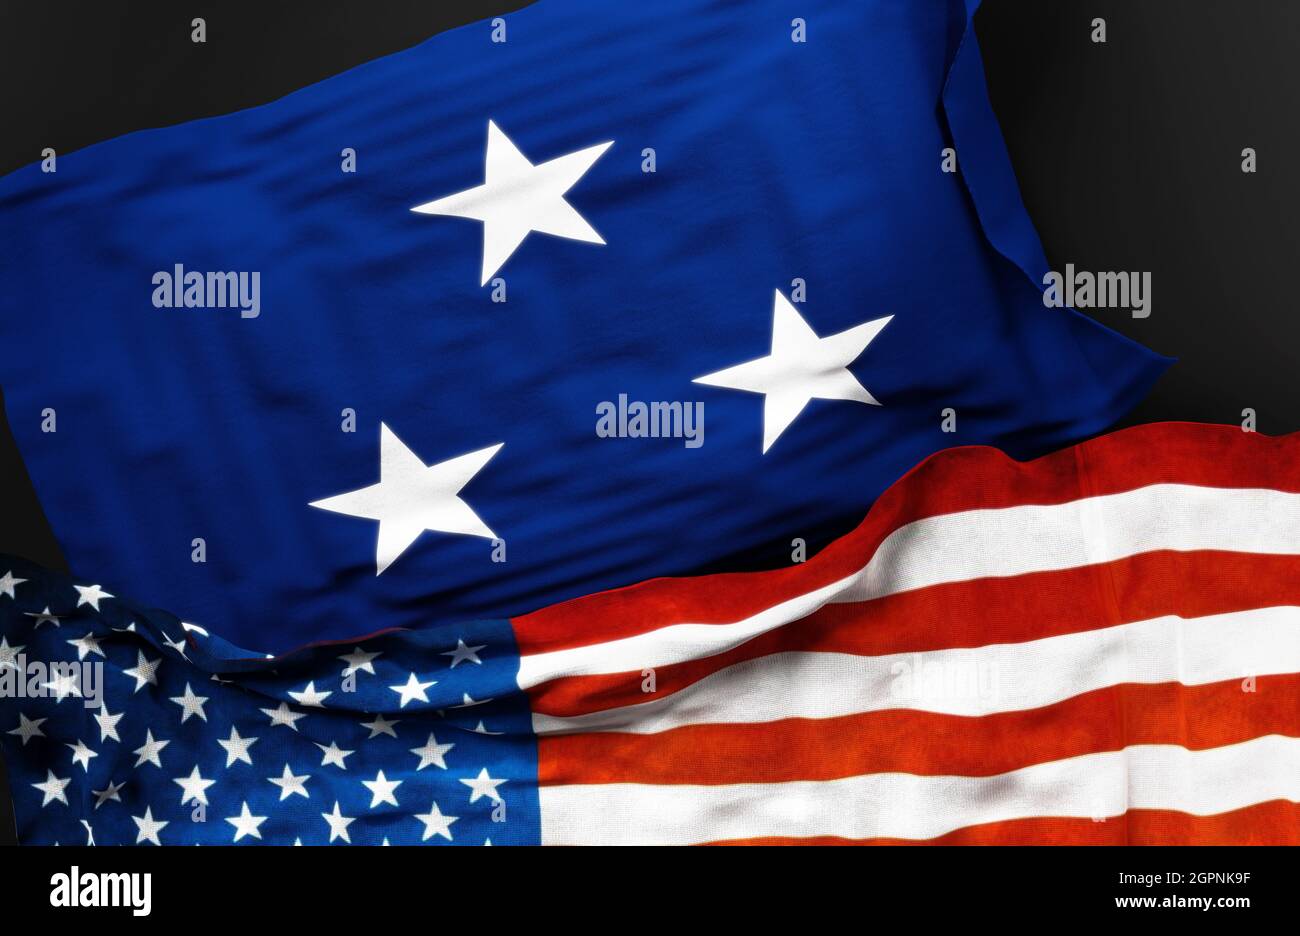 Flag of a United States Navy vice admiral along with a flag of the United States of America as a symbol of unity between them, 3d illustration Stock Photo